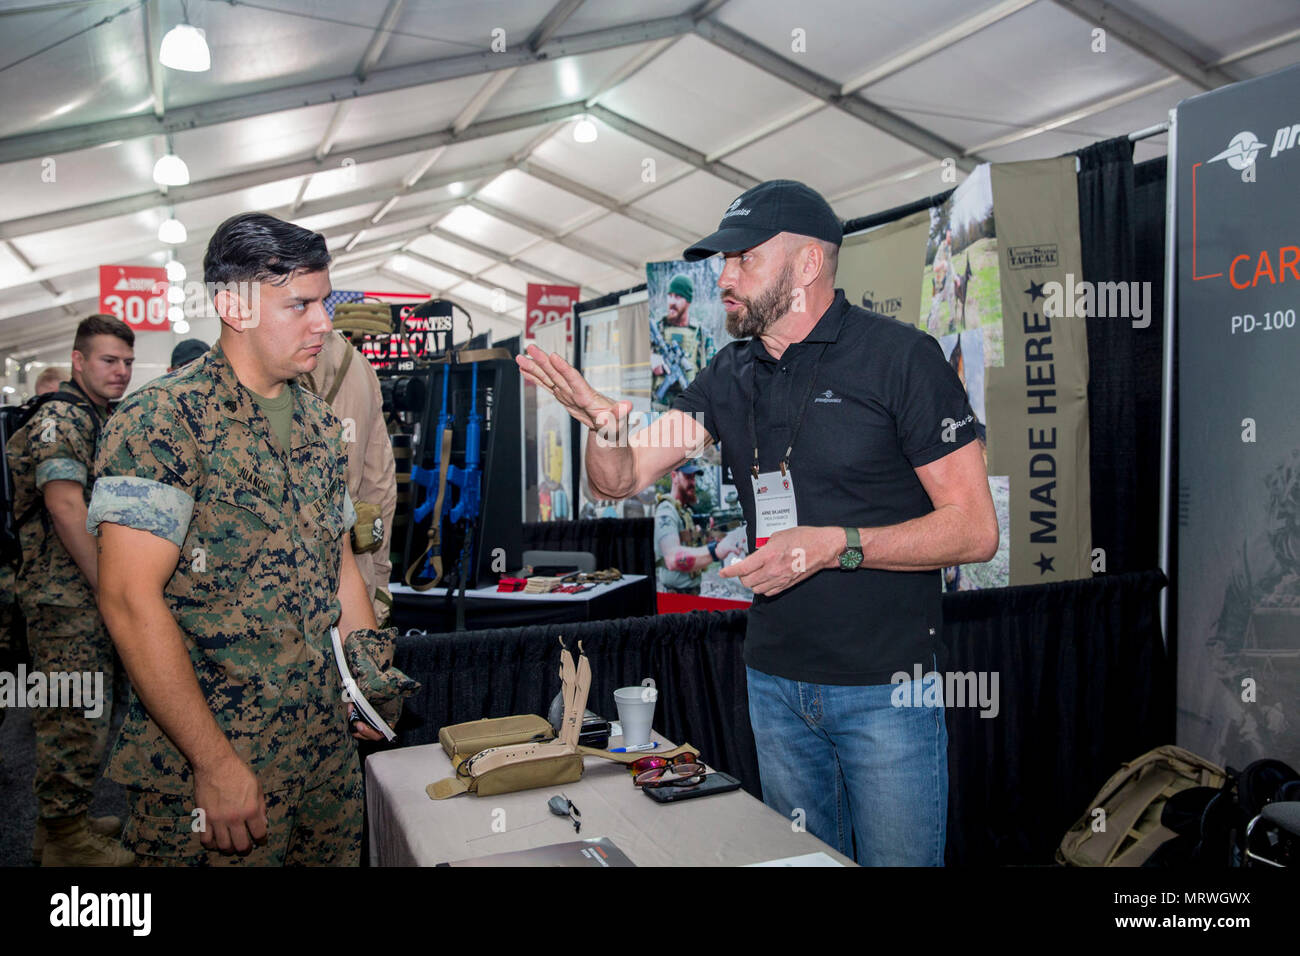 Arne Skjaerpe, right, field marketing director, Proxdynamics, speaks about the versatility of the company’s products to Marines during the Marine South Military Exposition, Goettege Field House, Camp Lejeune N.C., April 13, 2017. The Marine South Exposition is sponsored by the Marine Corps League and is a forum for defense contractors to display, inform, and promote the latest in defense equipment and technology. Stock Photo